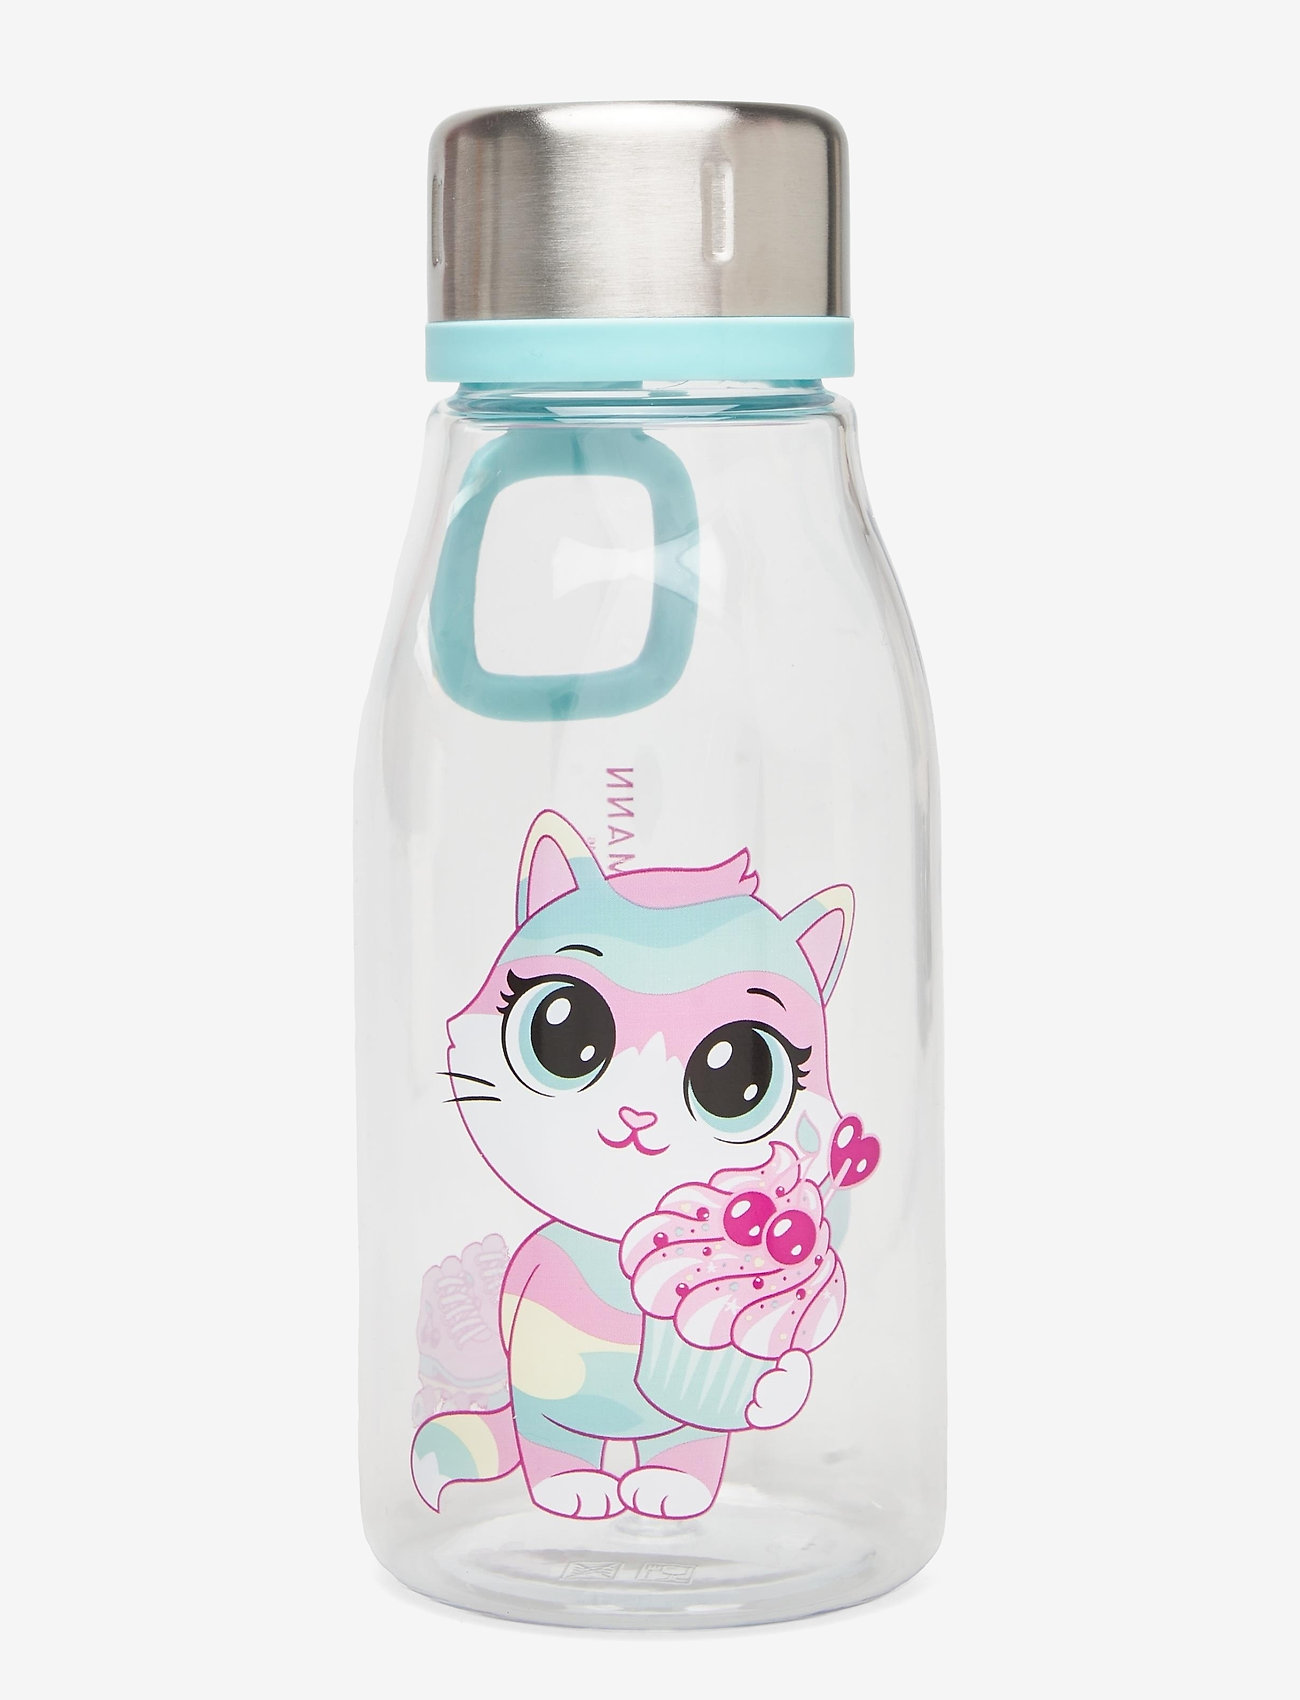 Beckmann of Norway Bottle 0,4l - Sweetie (Clear) - 14 € Boozt.com